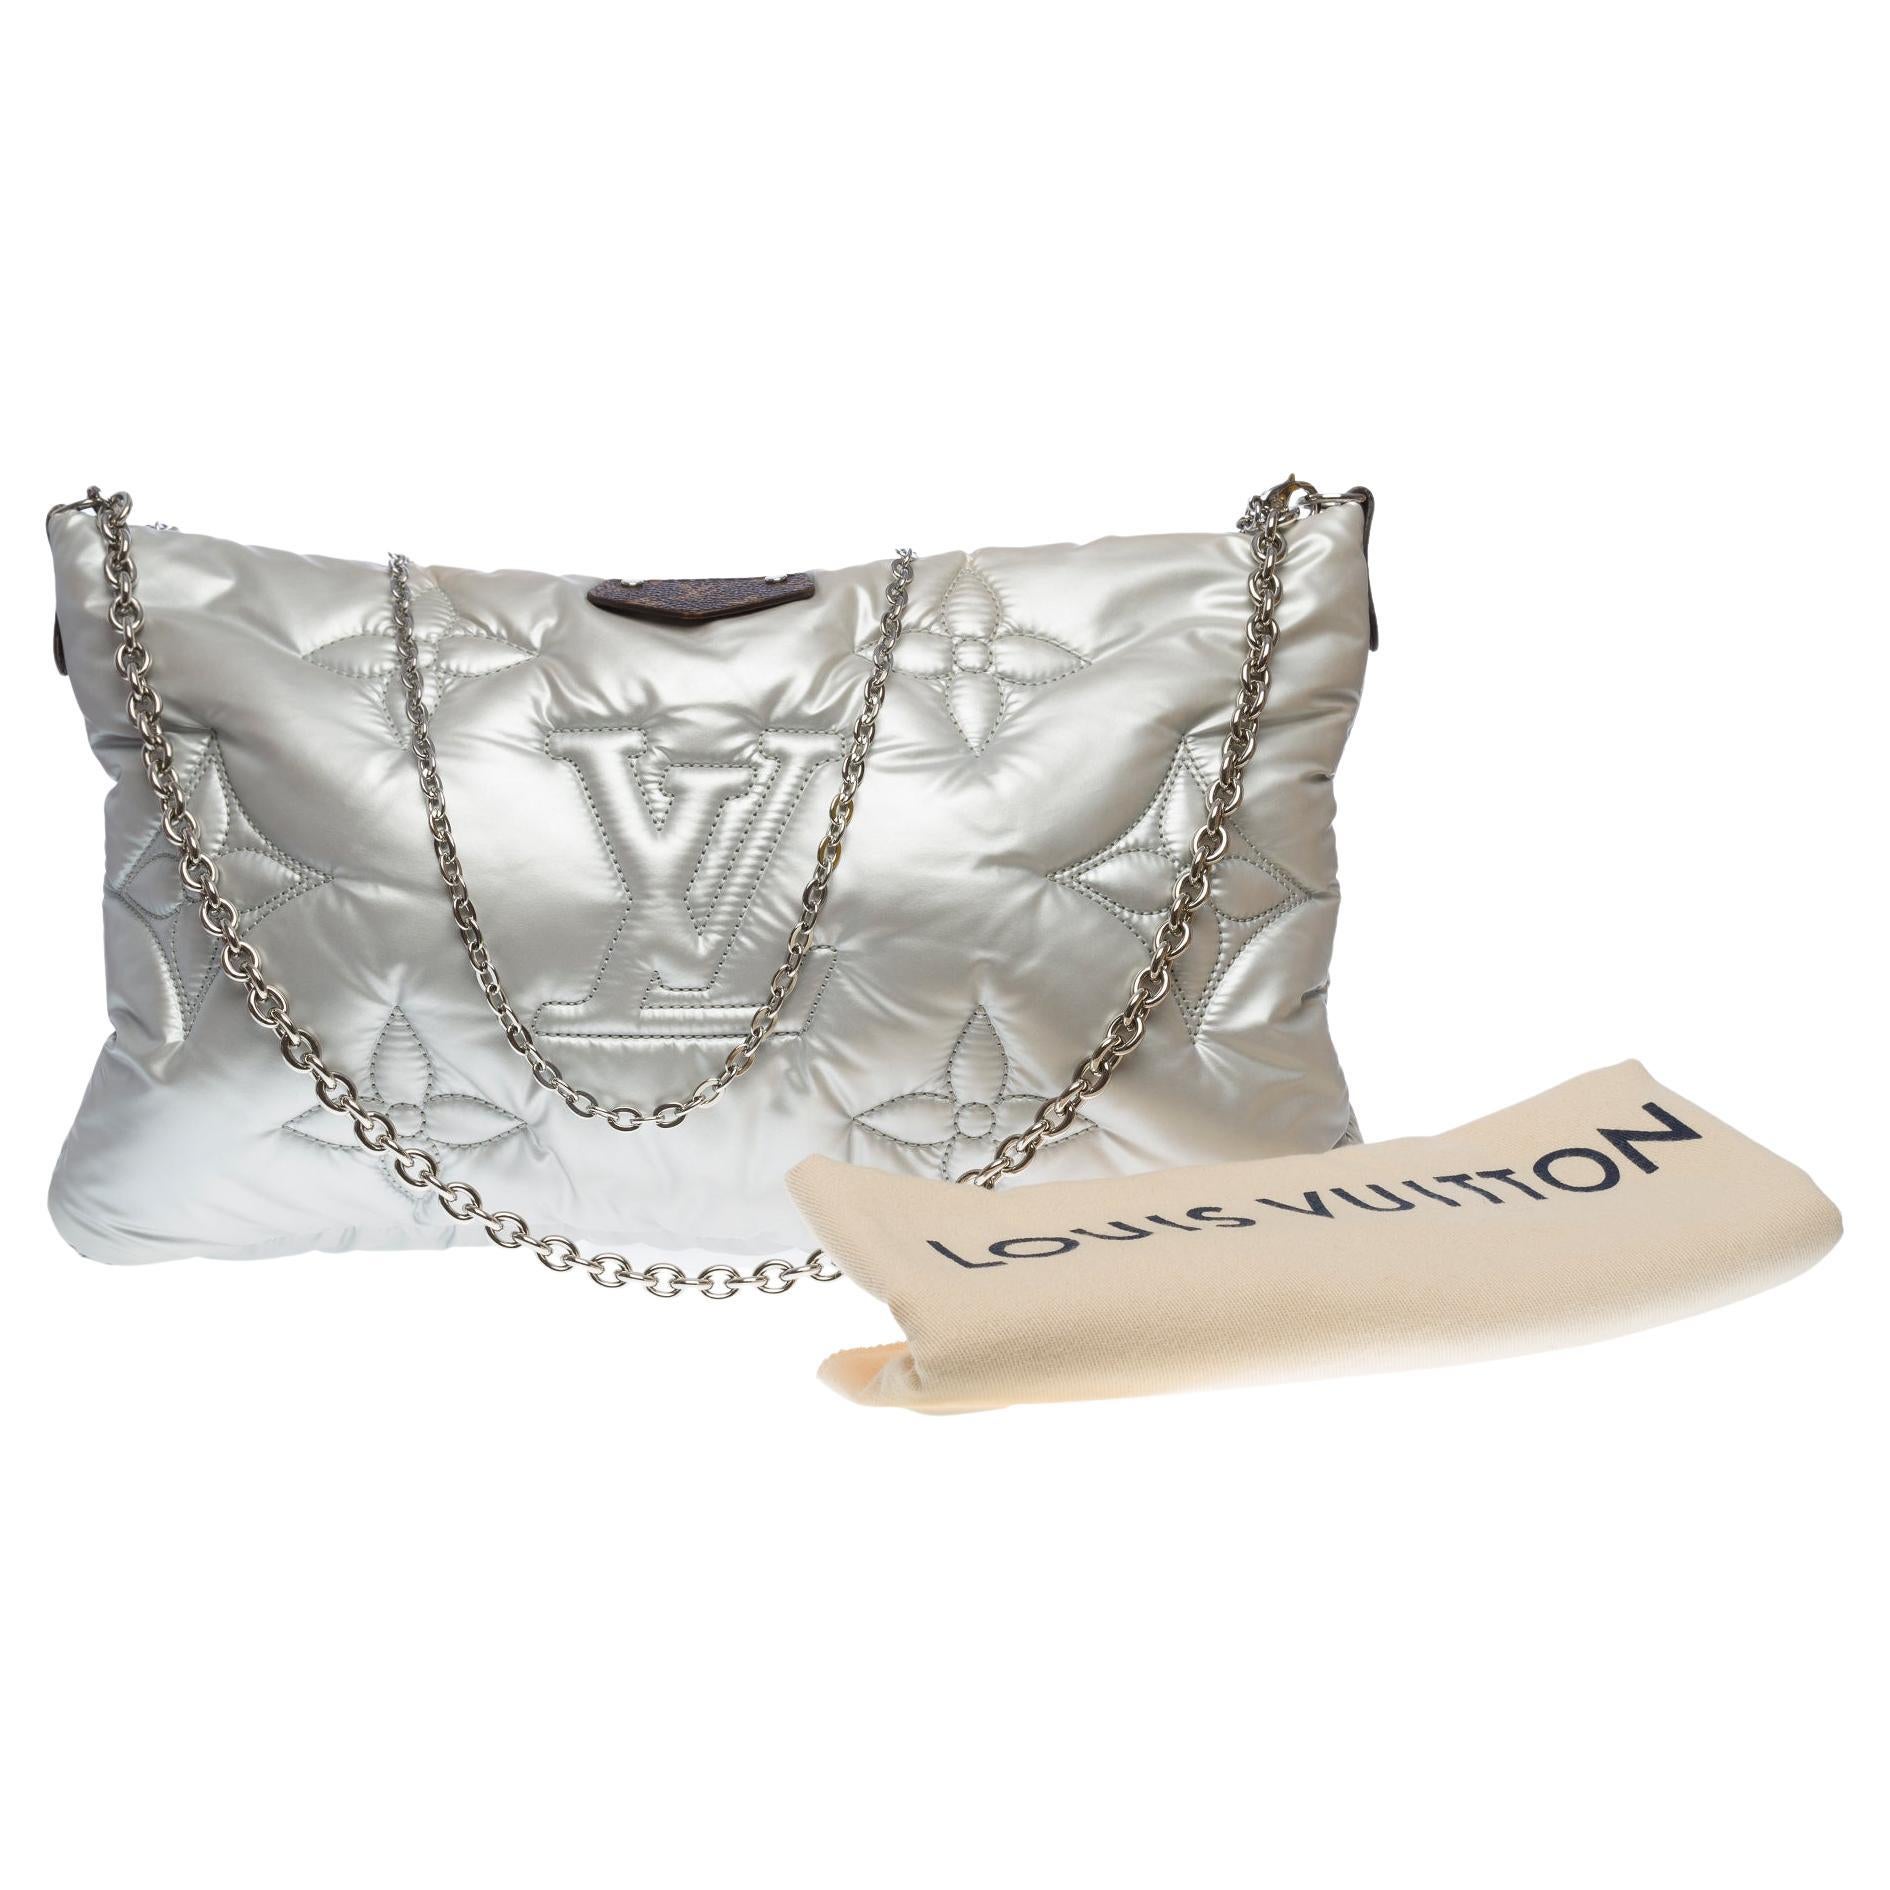 Chanel Vintage Quilted Flap Tassel Clutch - dress. Raleigh